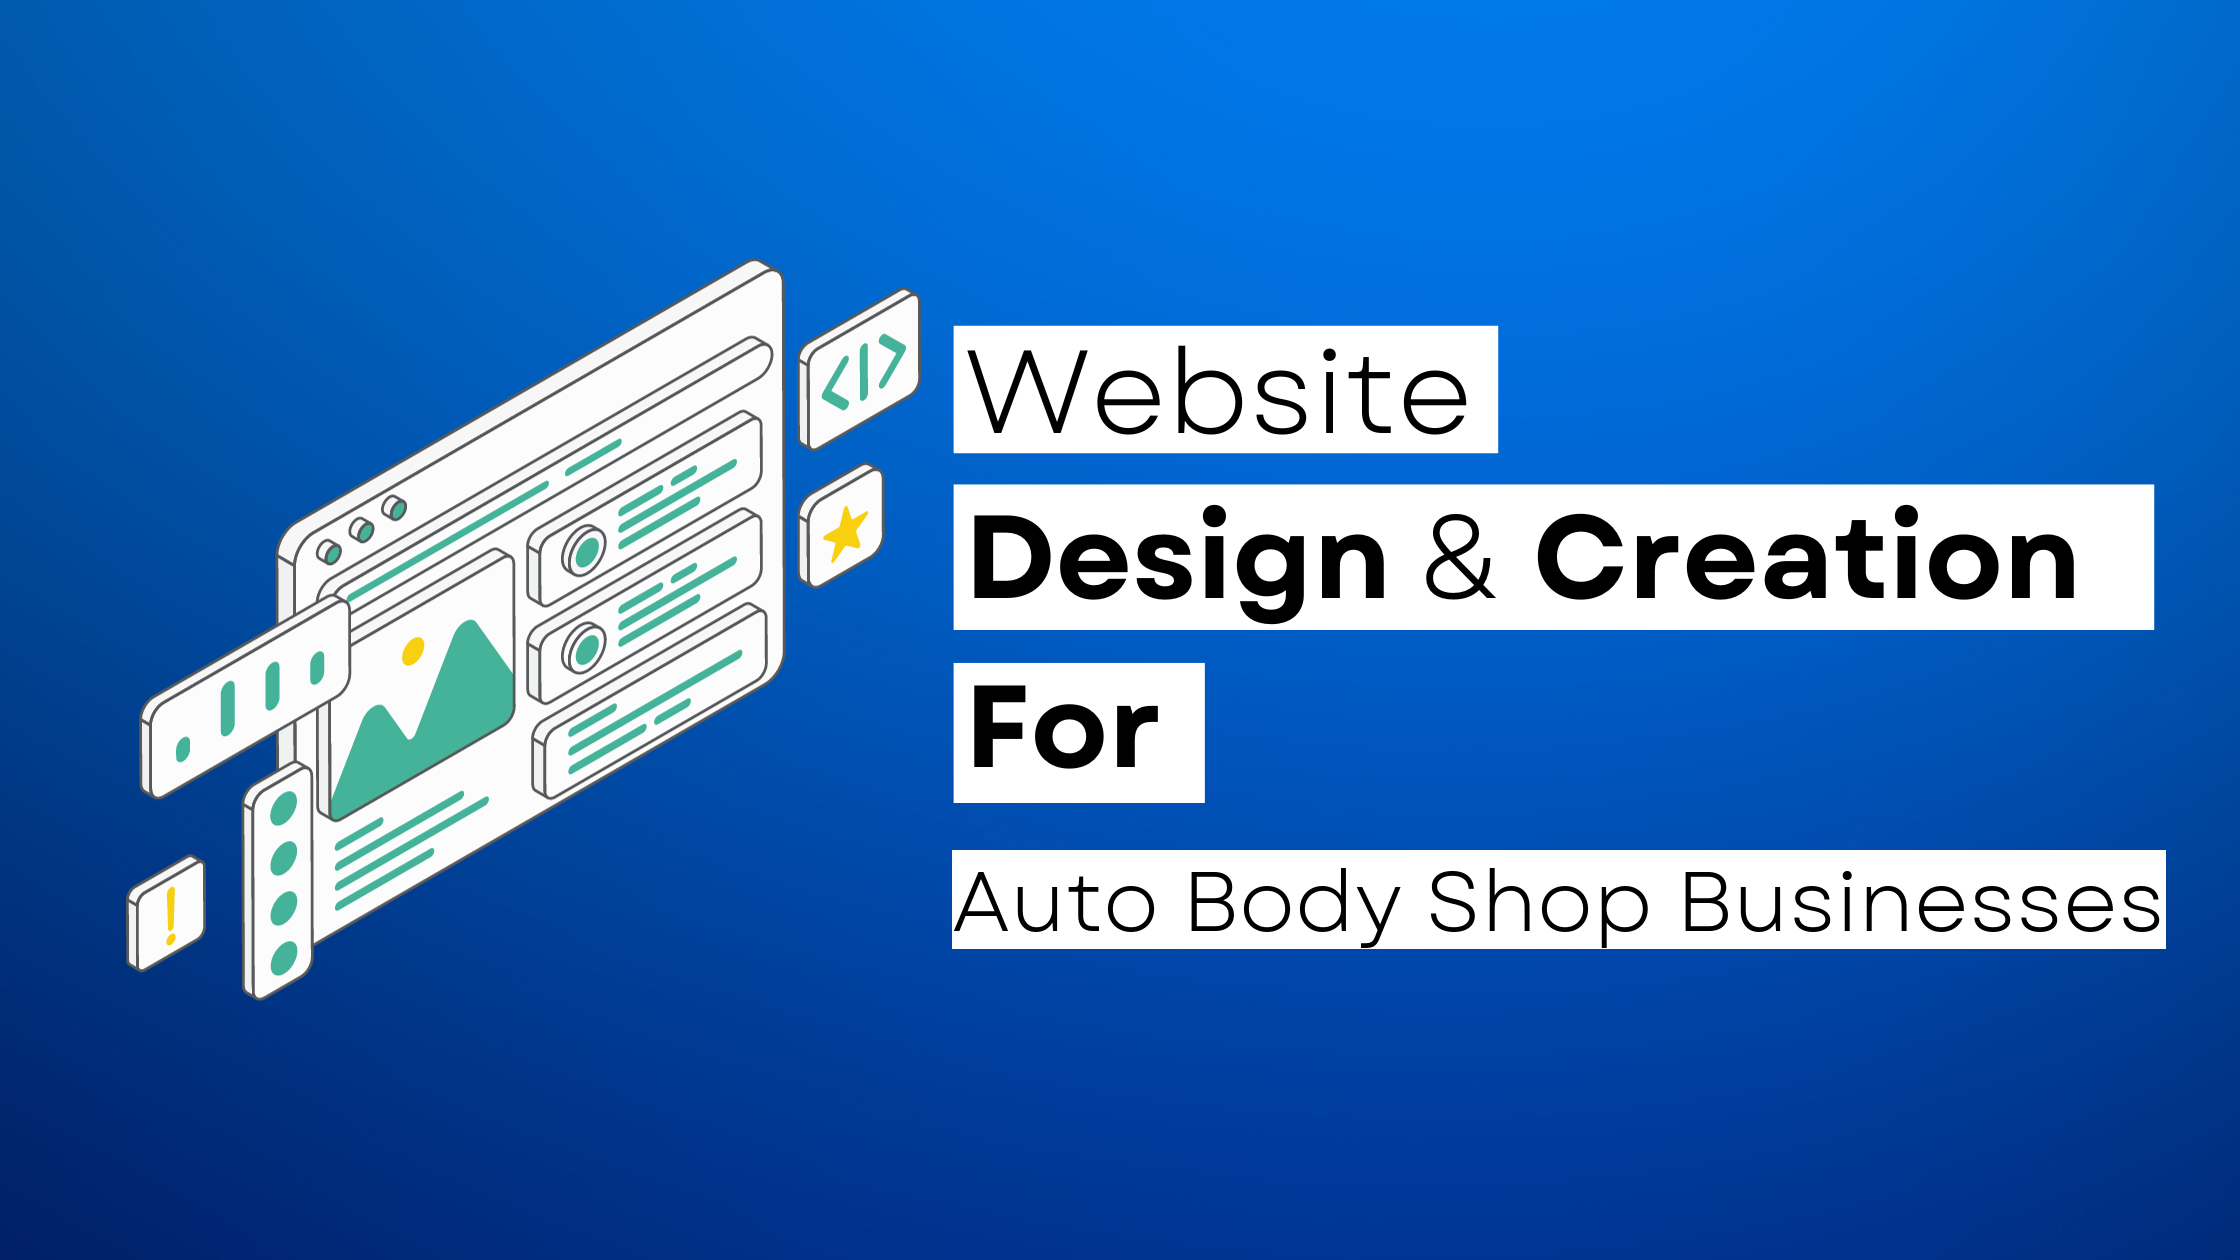 How to start a Auto Body Shop website